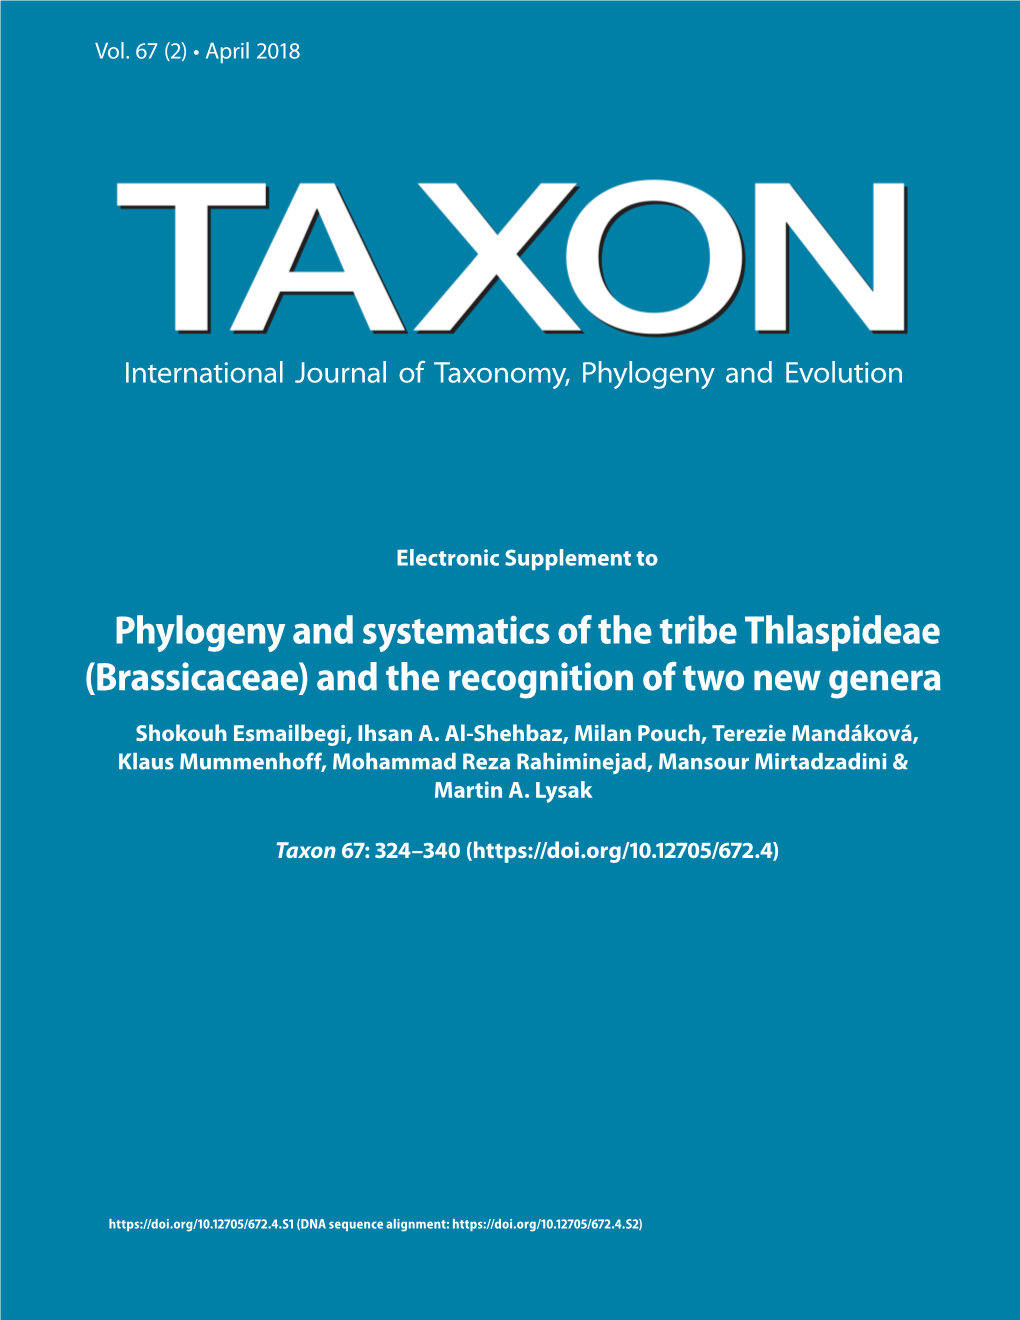 Phylogeny and Systematics of the Tribe Thlaspideae (Brassicaceae) and the Recognition of Two New Genera Shokouh Esmailbegi, Ihsan A